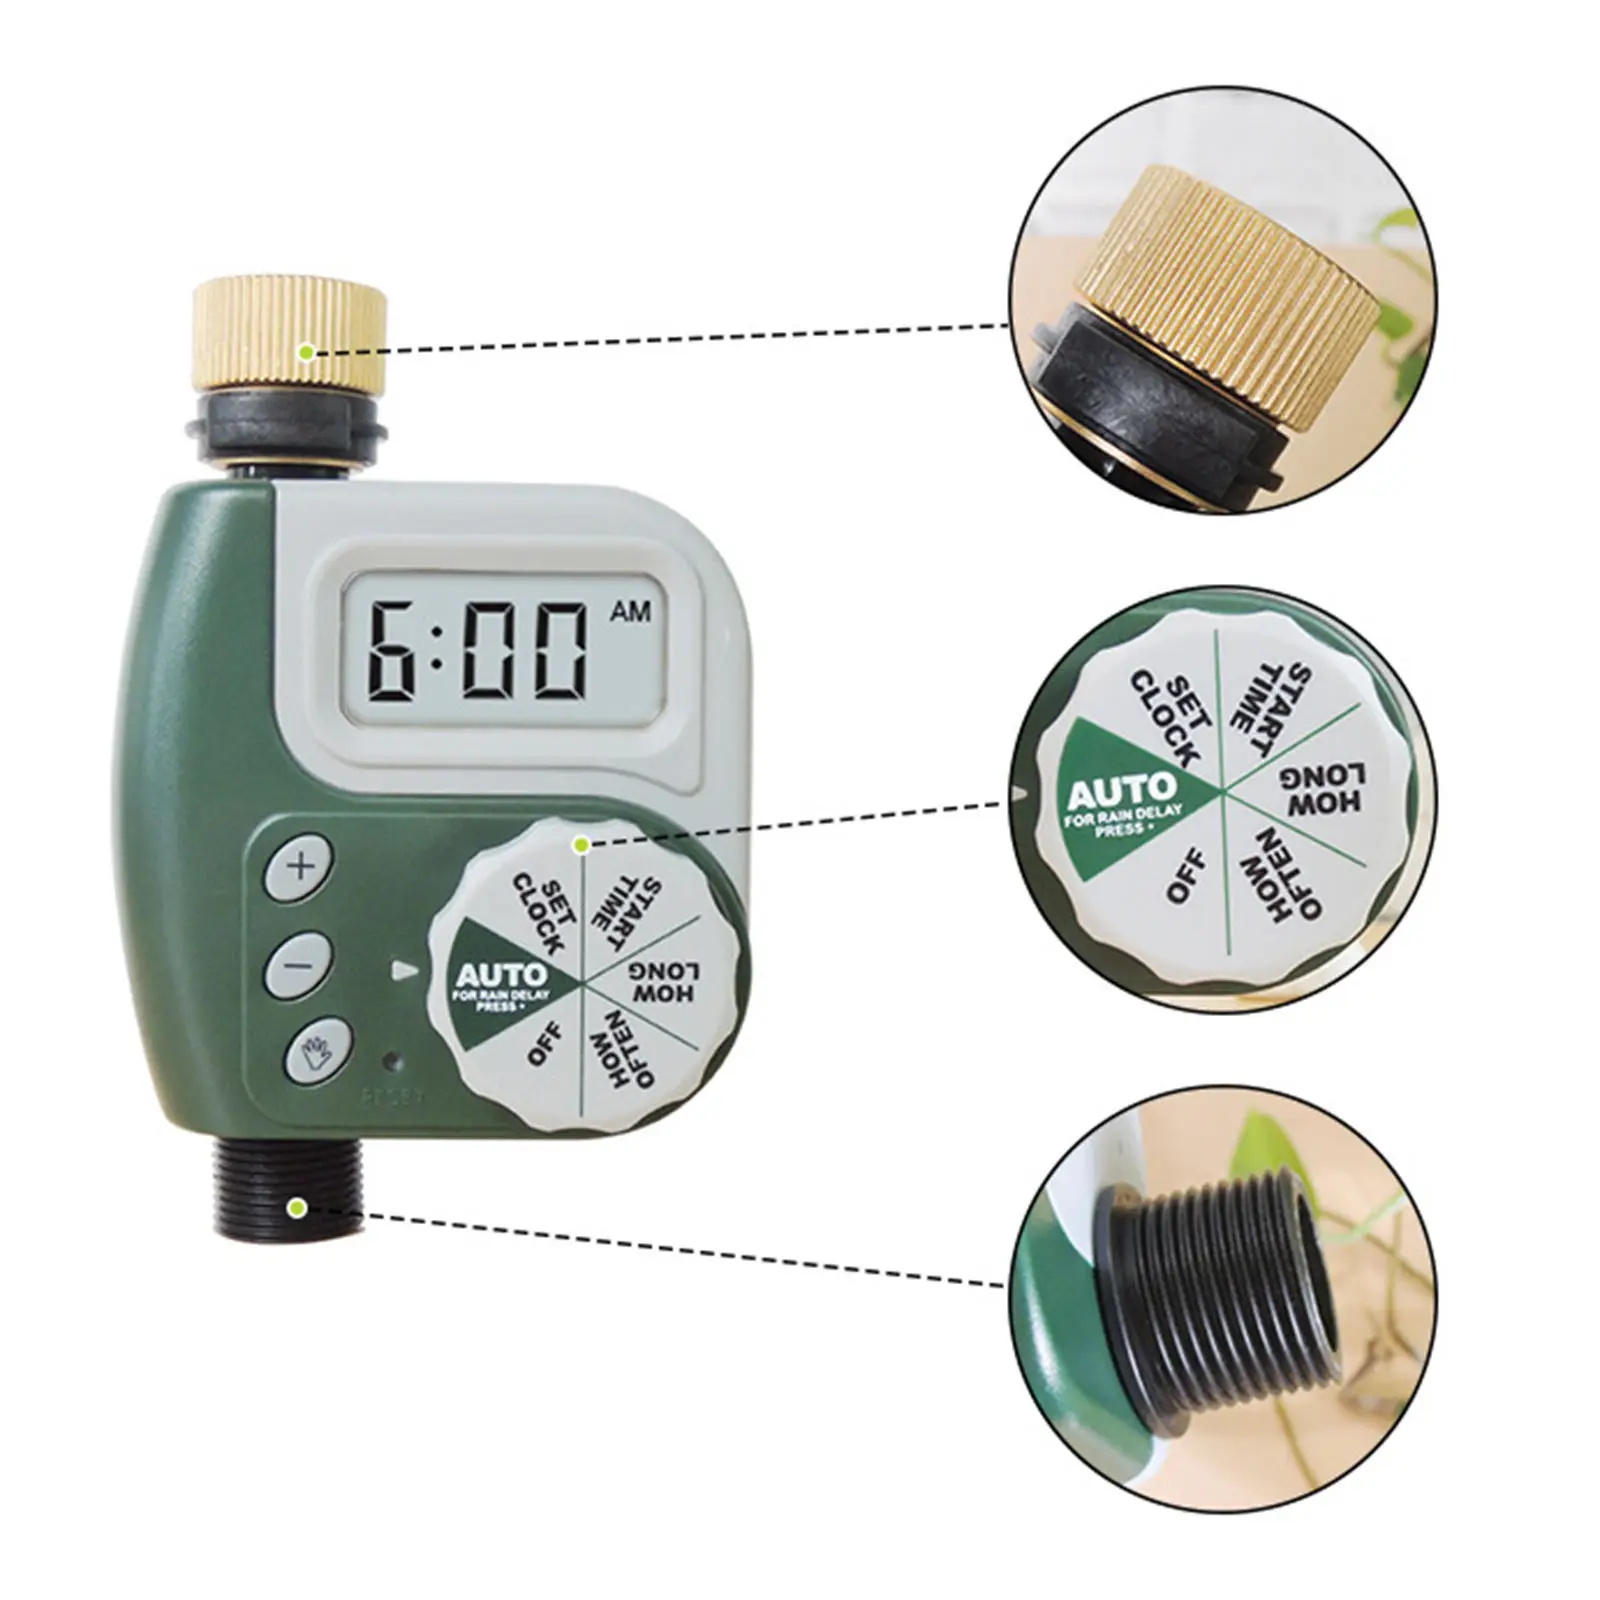 LED Screen Electronic Water Timer Sprinkler Controllers Outdoor Garden Timer Automatic Watering Device Irrigation Tool